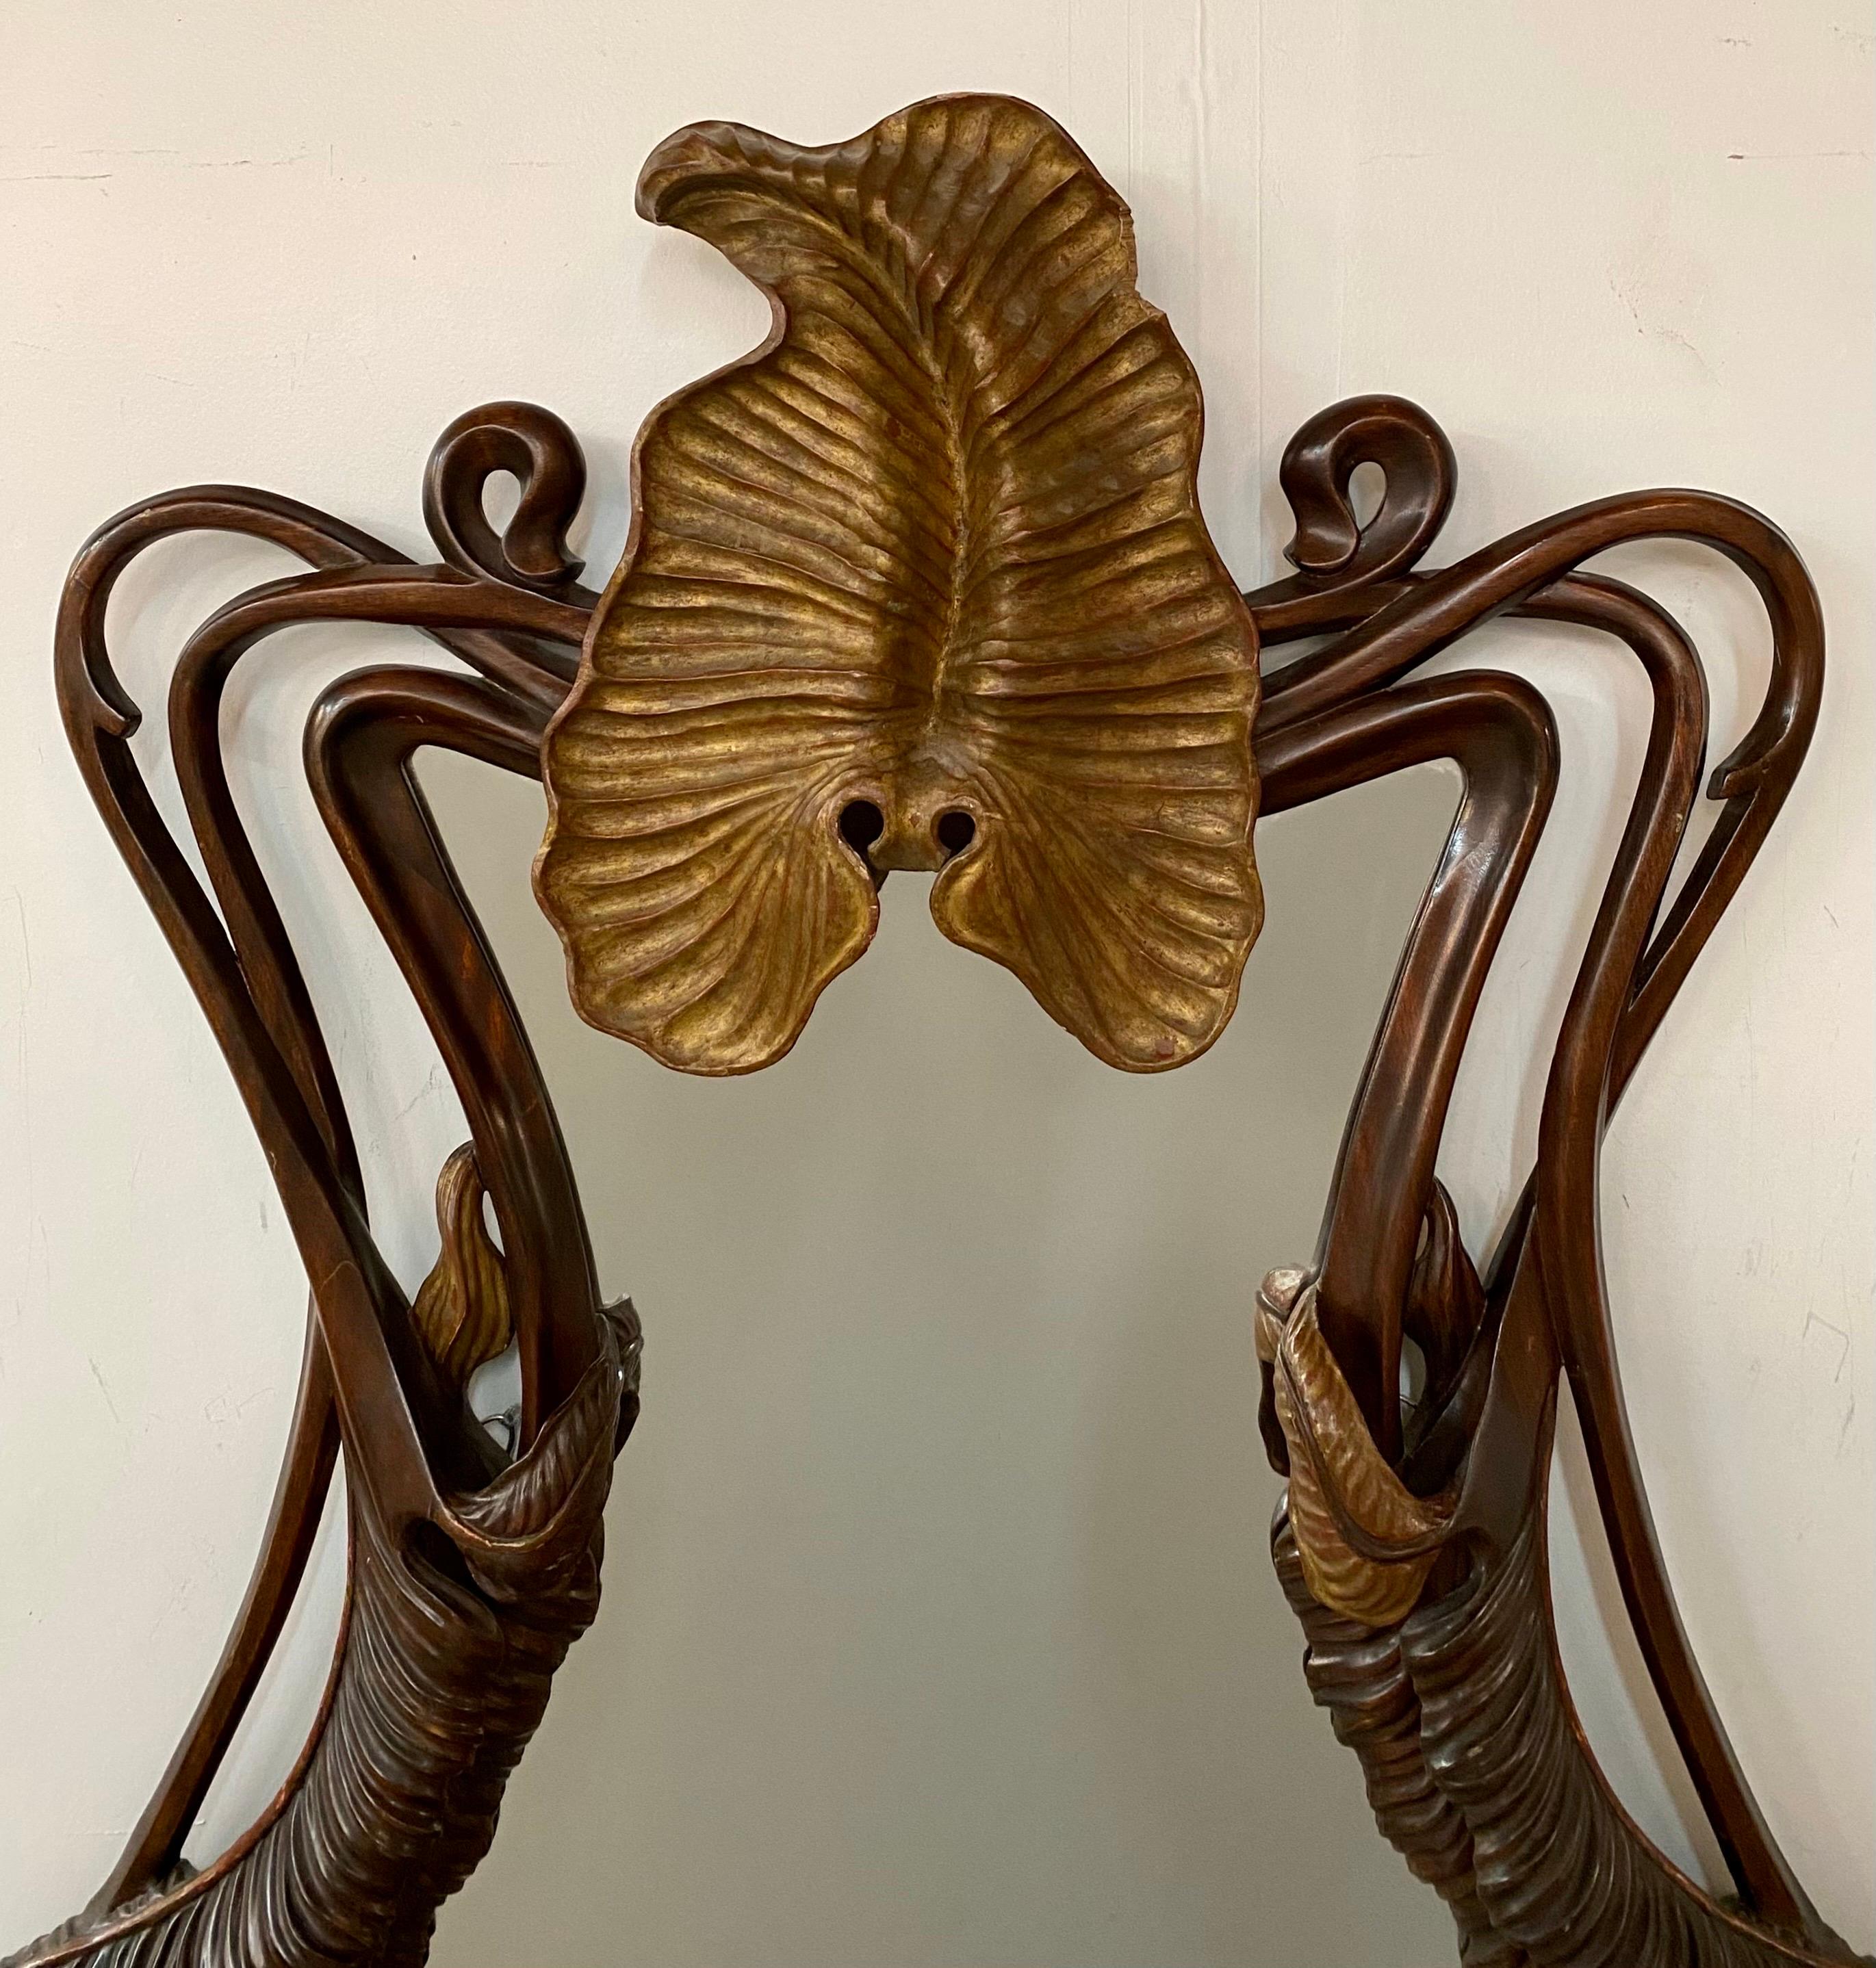 An antique French Art Nouveau  Mahogany wood carved mirror, gracefully fashioned in the likeness of a butterfly. At the heart of this mirror's allure lies its hand-carved frame meticulously crafted to emulate the ethereal and delicate wings of a